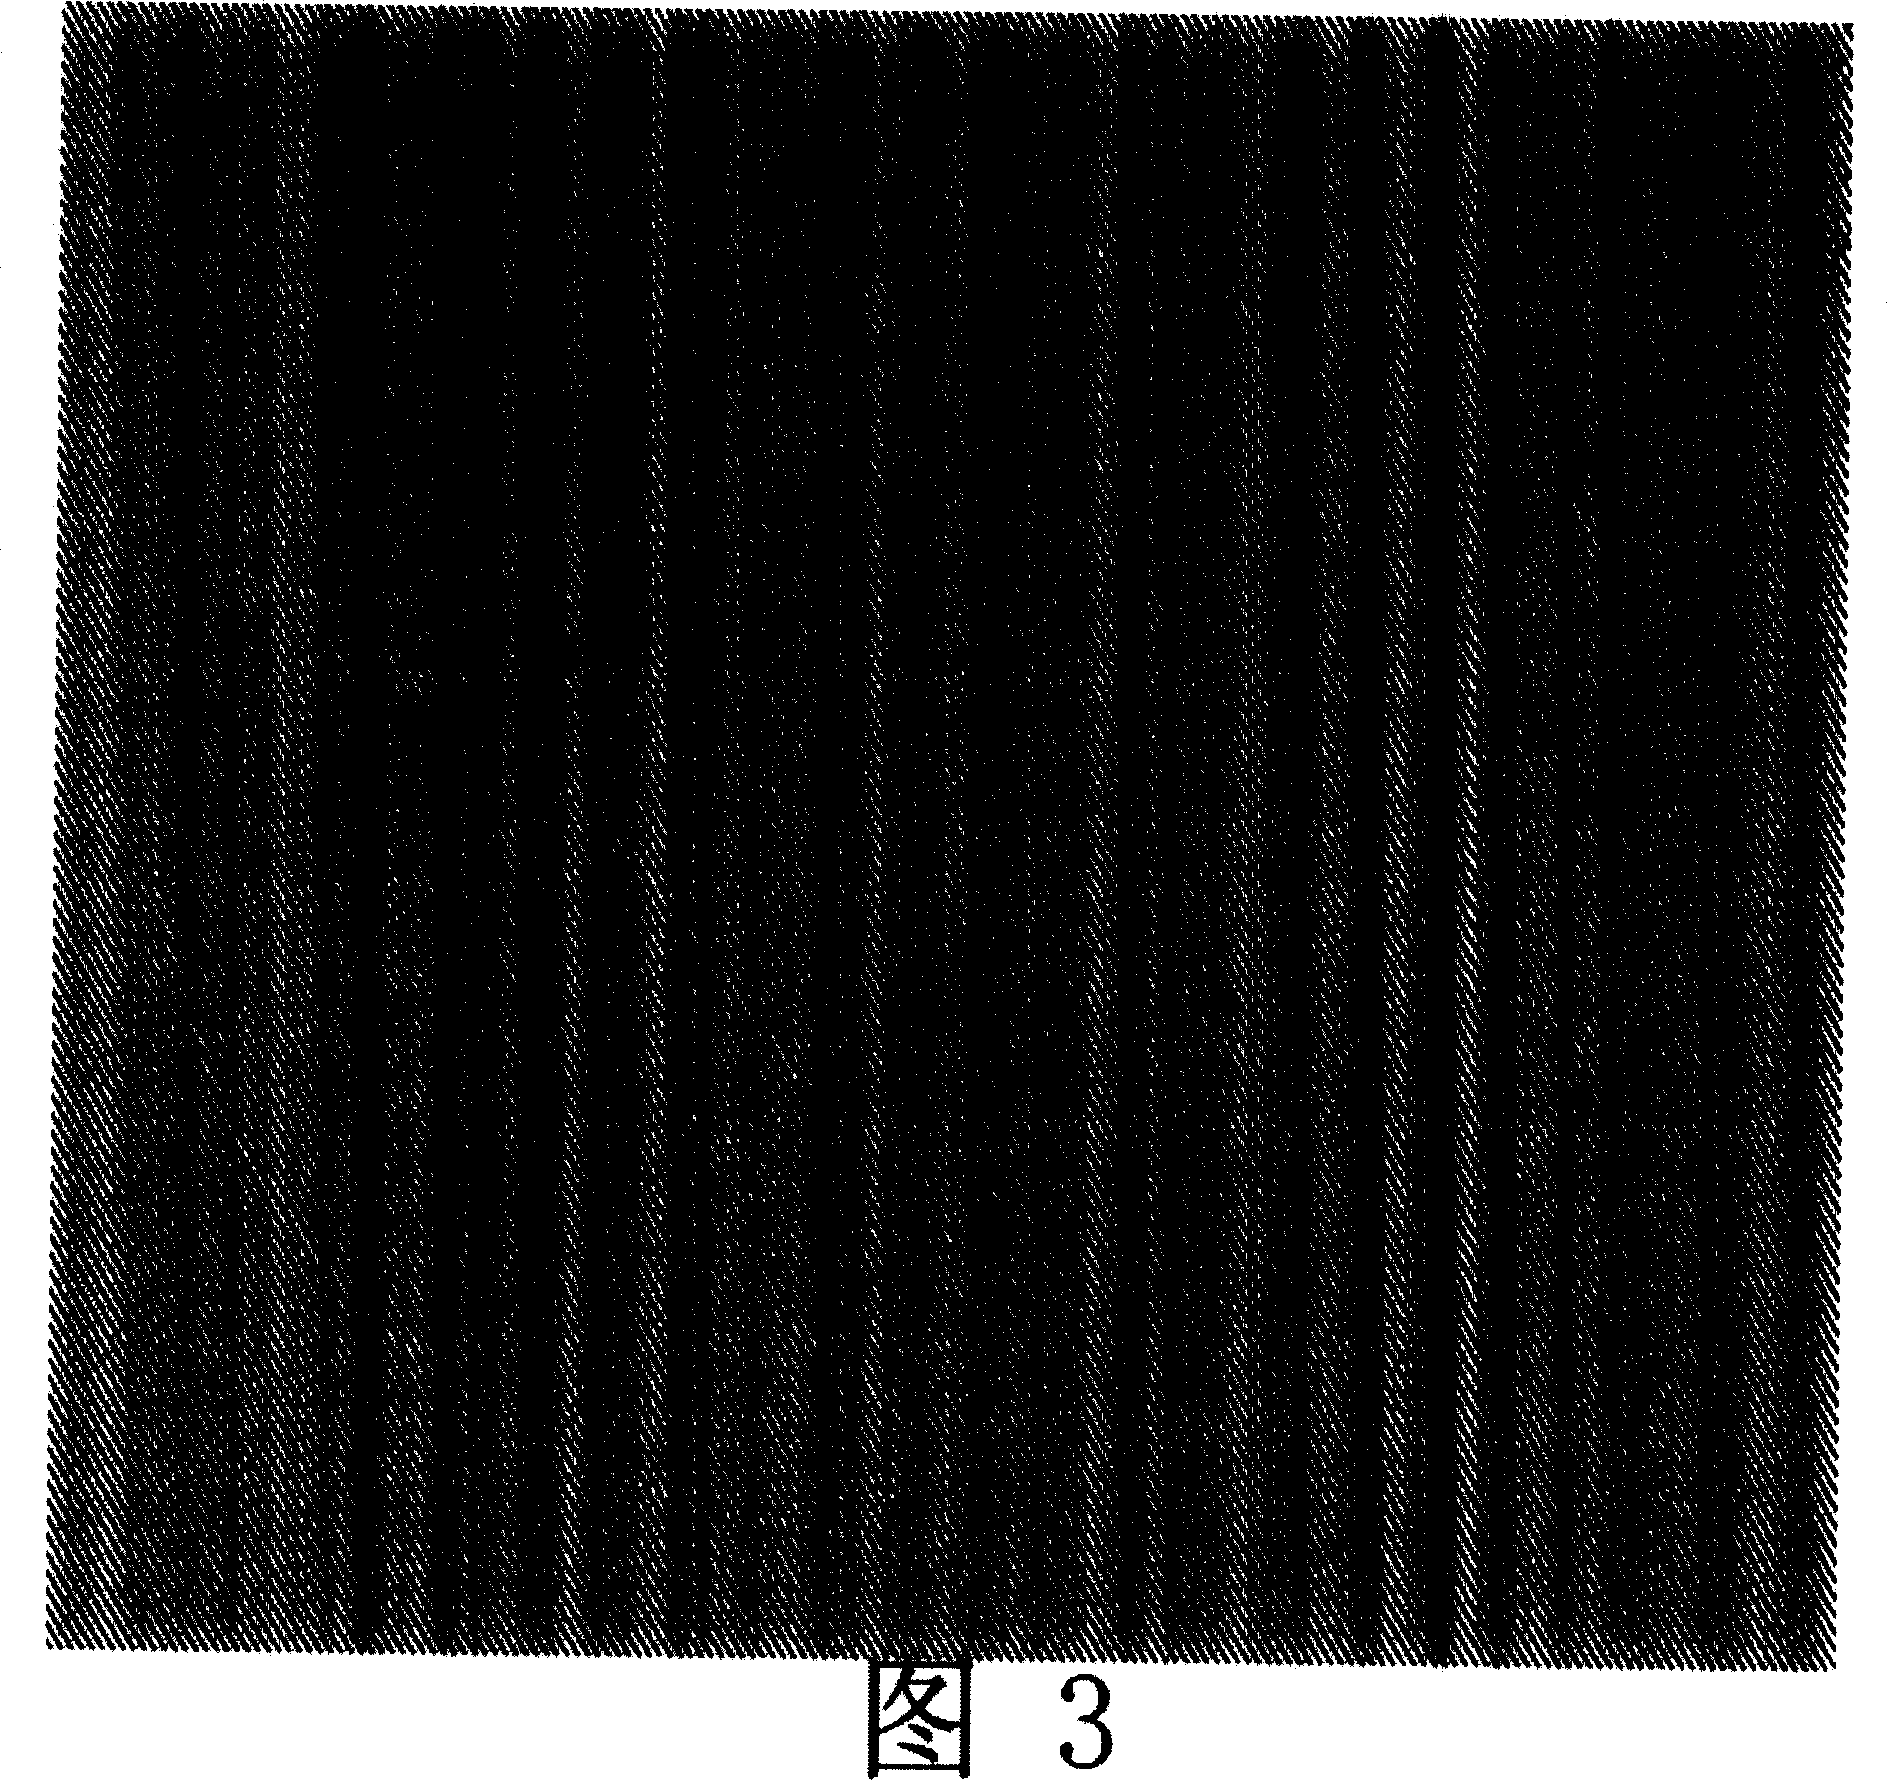 Method for abstracting graph and text infromation utilizing half-hue image networking hiding